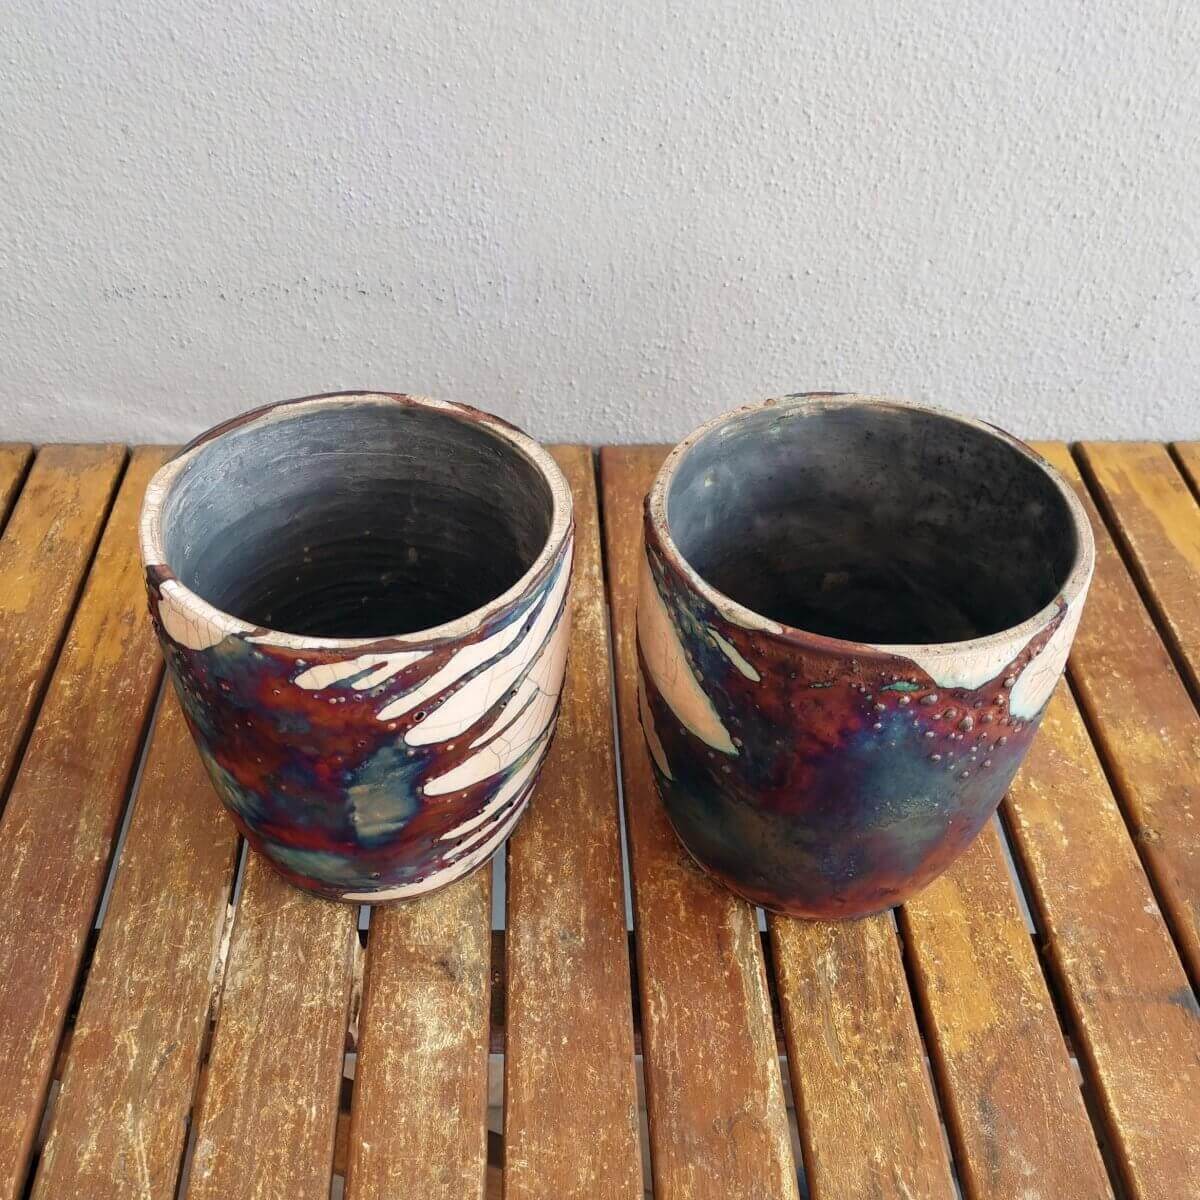 Raku pottery vase ceramic home decor 2 Pack Pottery Pot Seicho - Ceramic Home Decor Raku planter for Indoor plants, cactus, and succulents - handmade gift for her